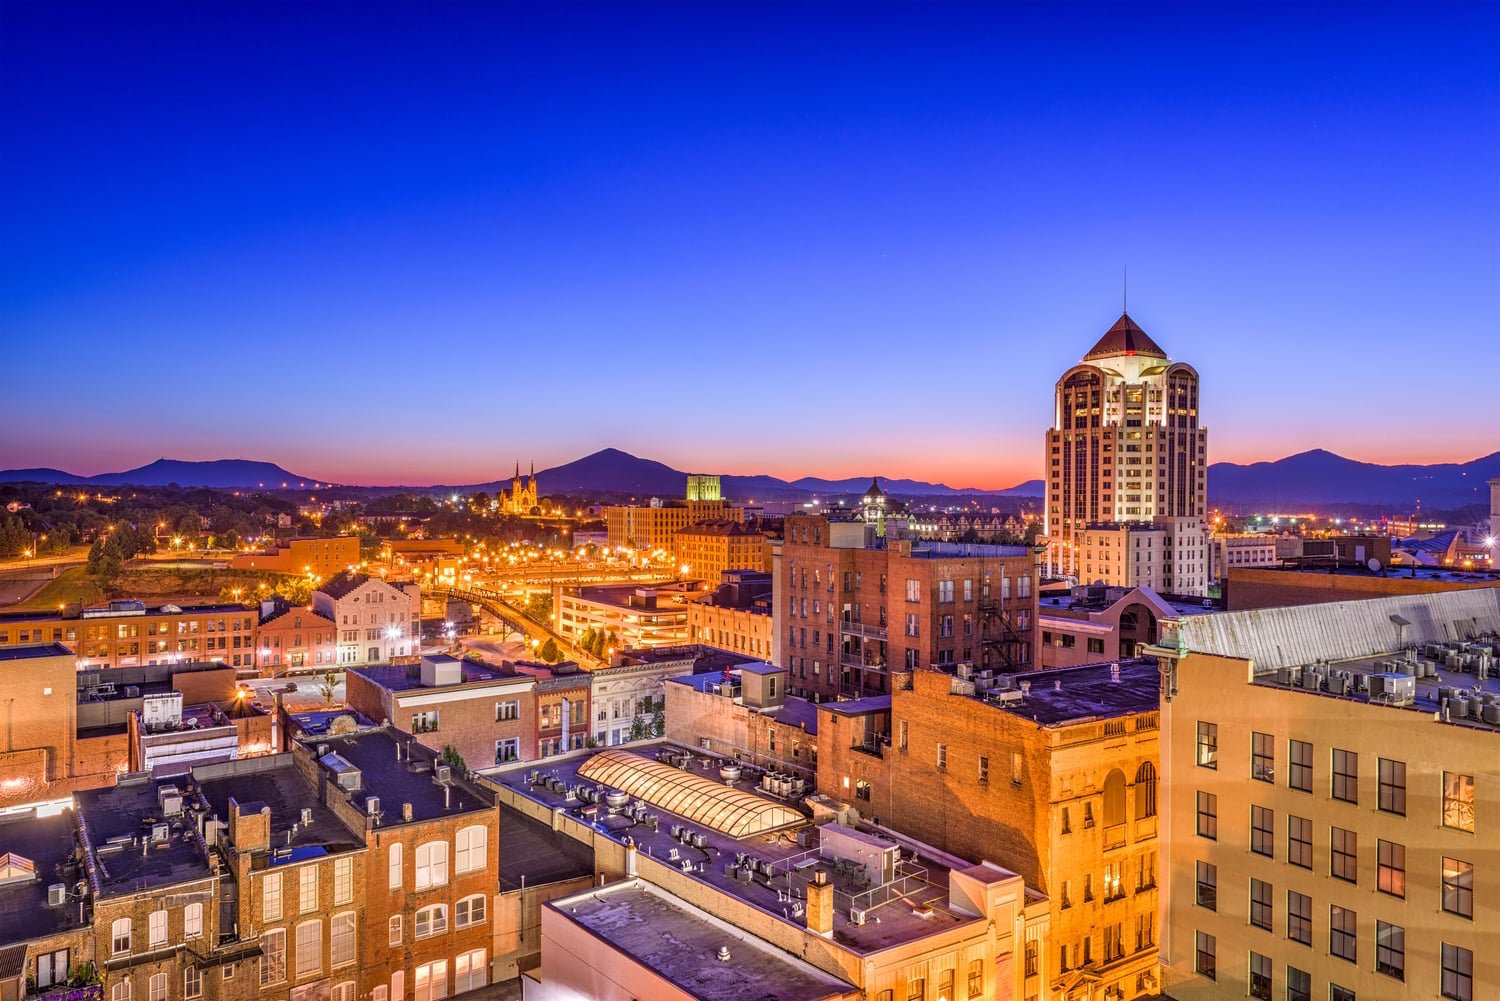 15-facts-about-innovations-and-technological-advances-in-roanoke-virginia